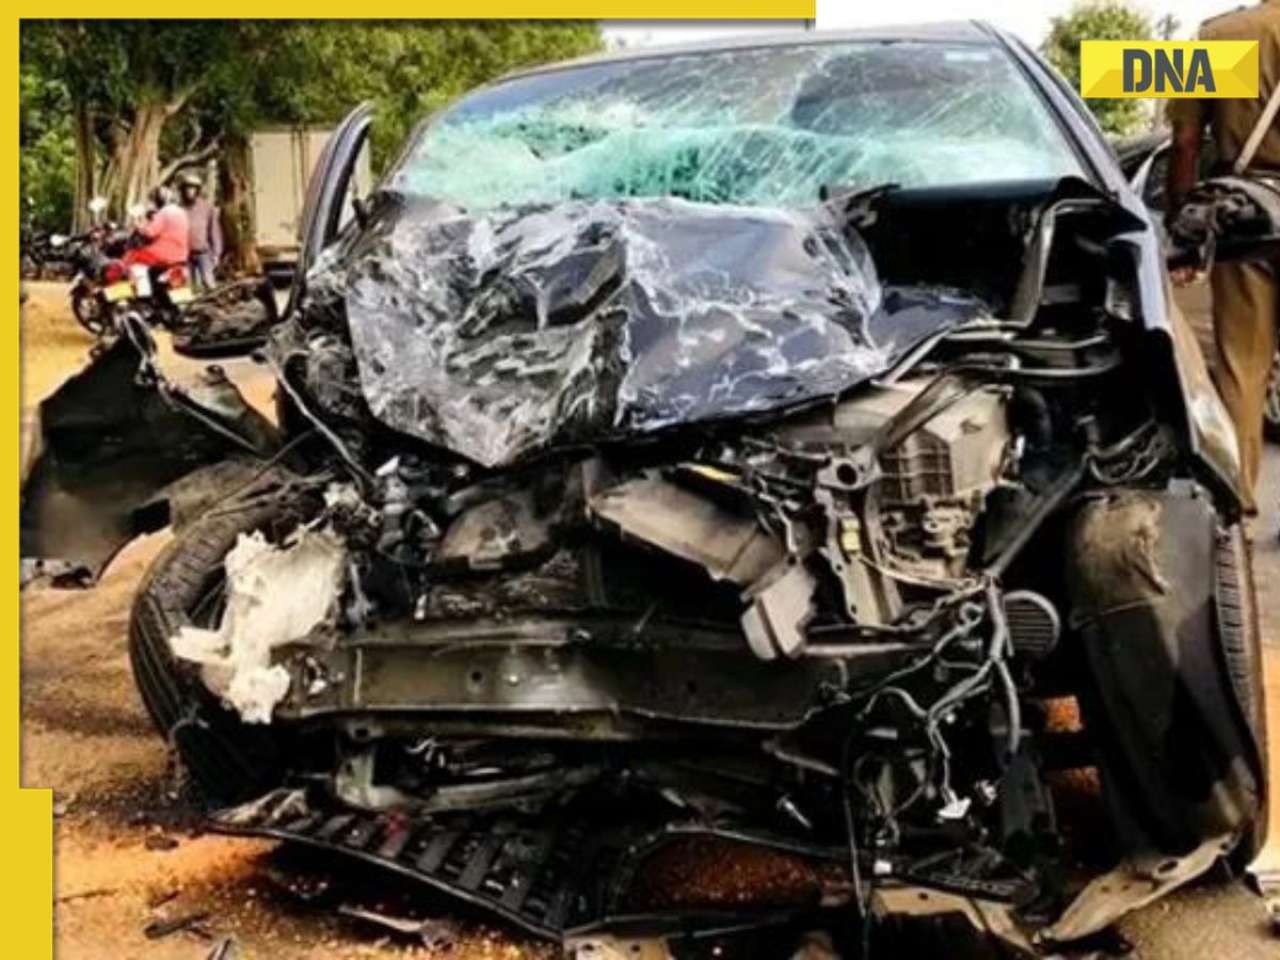 Ex-Sri Lankan cricketer meets with major car accident in Anuradhapura, pics of damaged car go viral